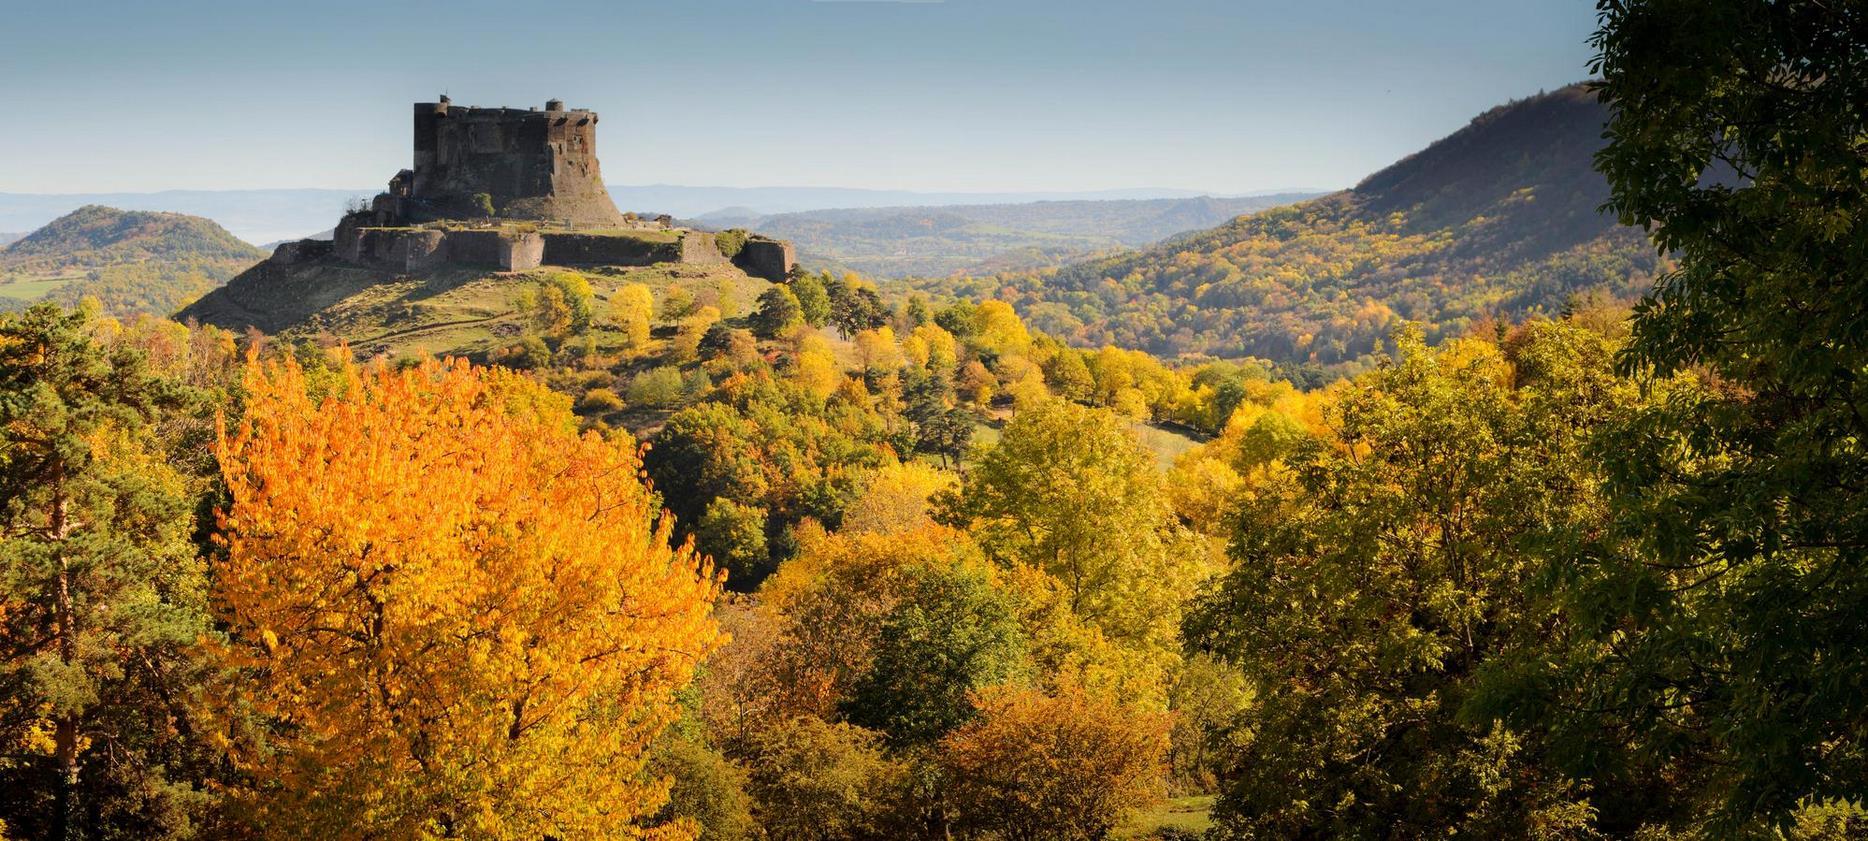 Super Besse - Chateau de Murol, fortified castle and the volcanoes of Auvergne